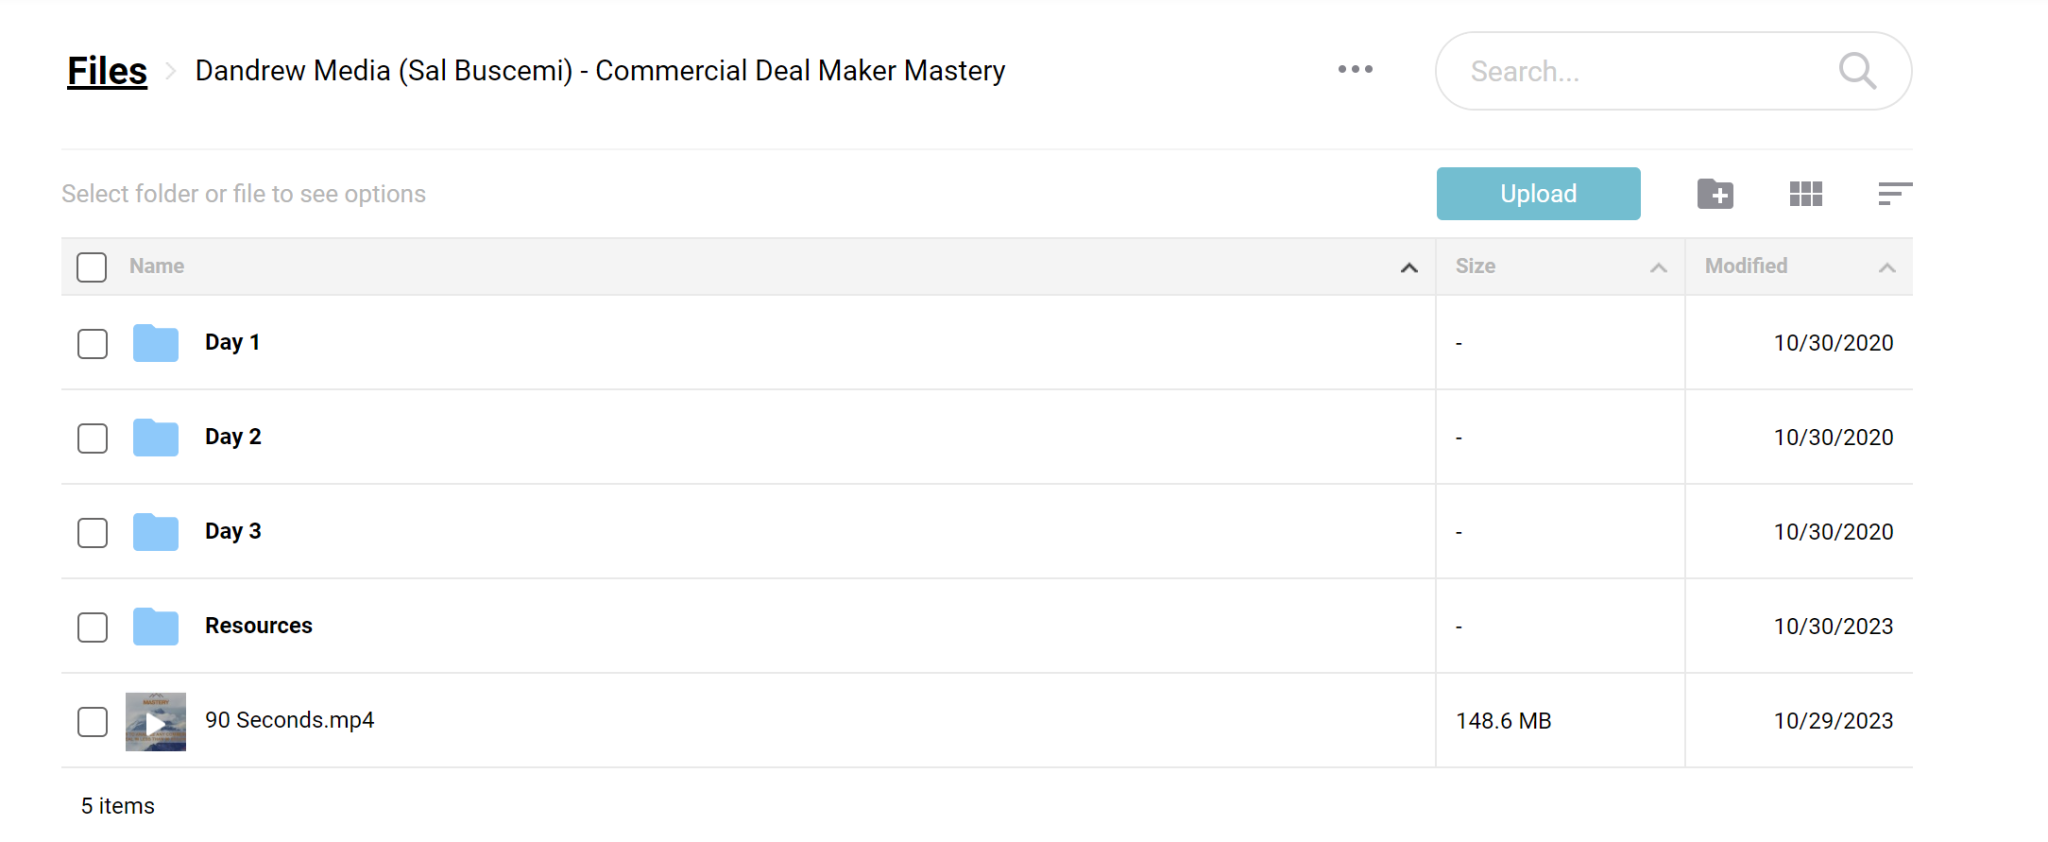 Dandrew Media (Sal Buscemi) Commercial Deal Maker Mastery Course